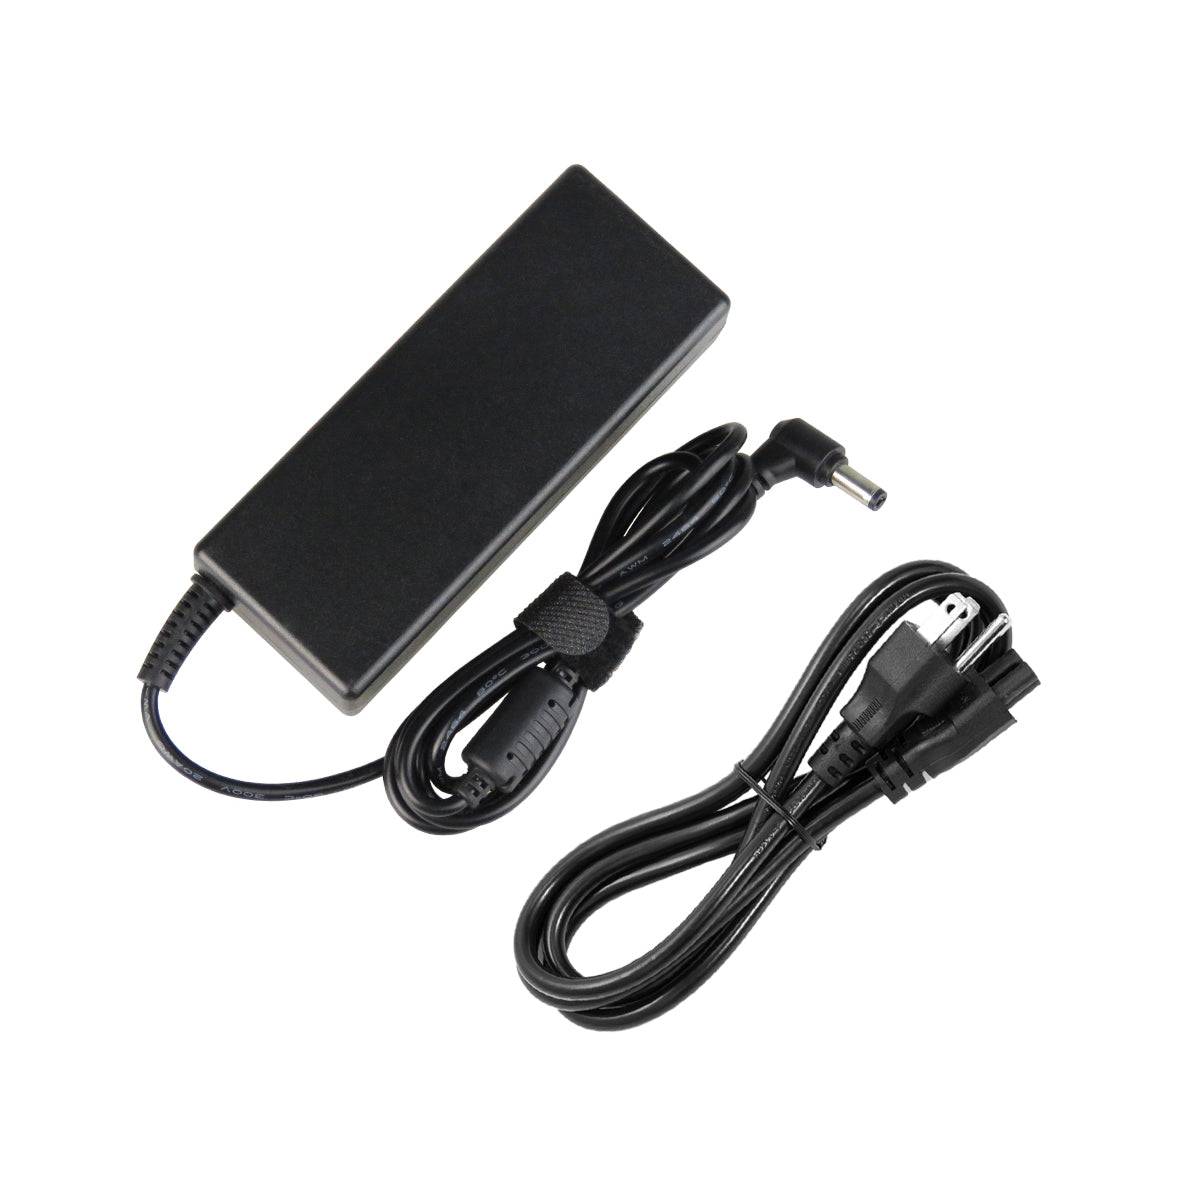 AC Adapter Charger for Toshiba Satellite C875 Notebook.